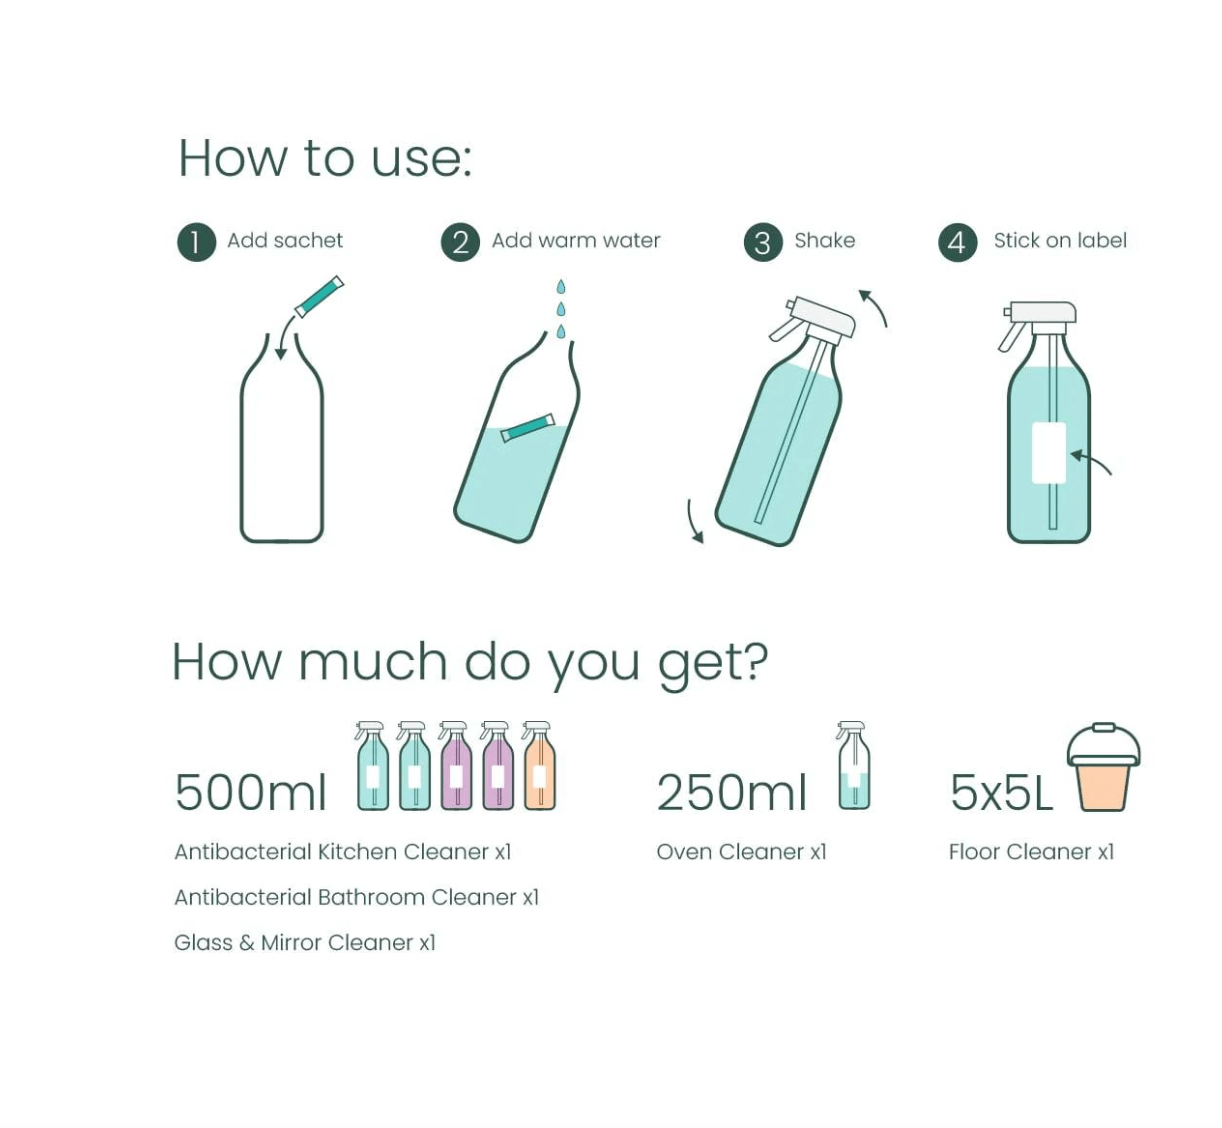 PRIOR SHOP Sustainable Cleaning Starter Kit